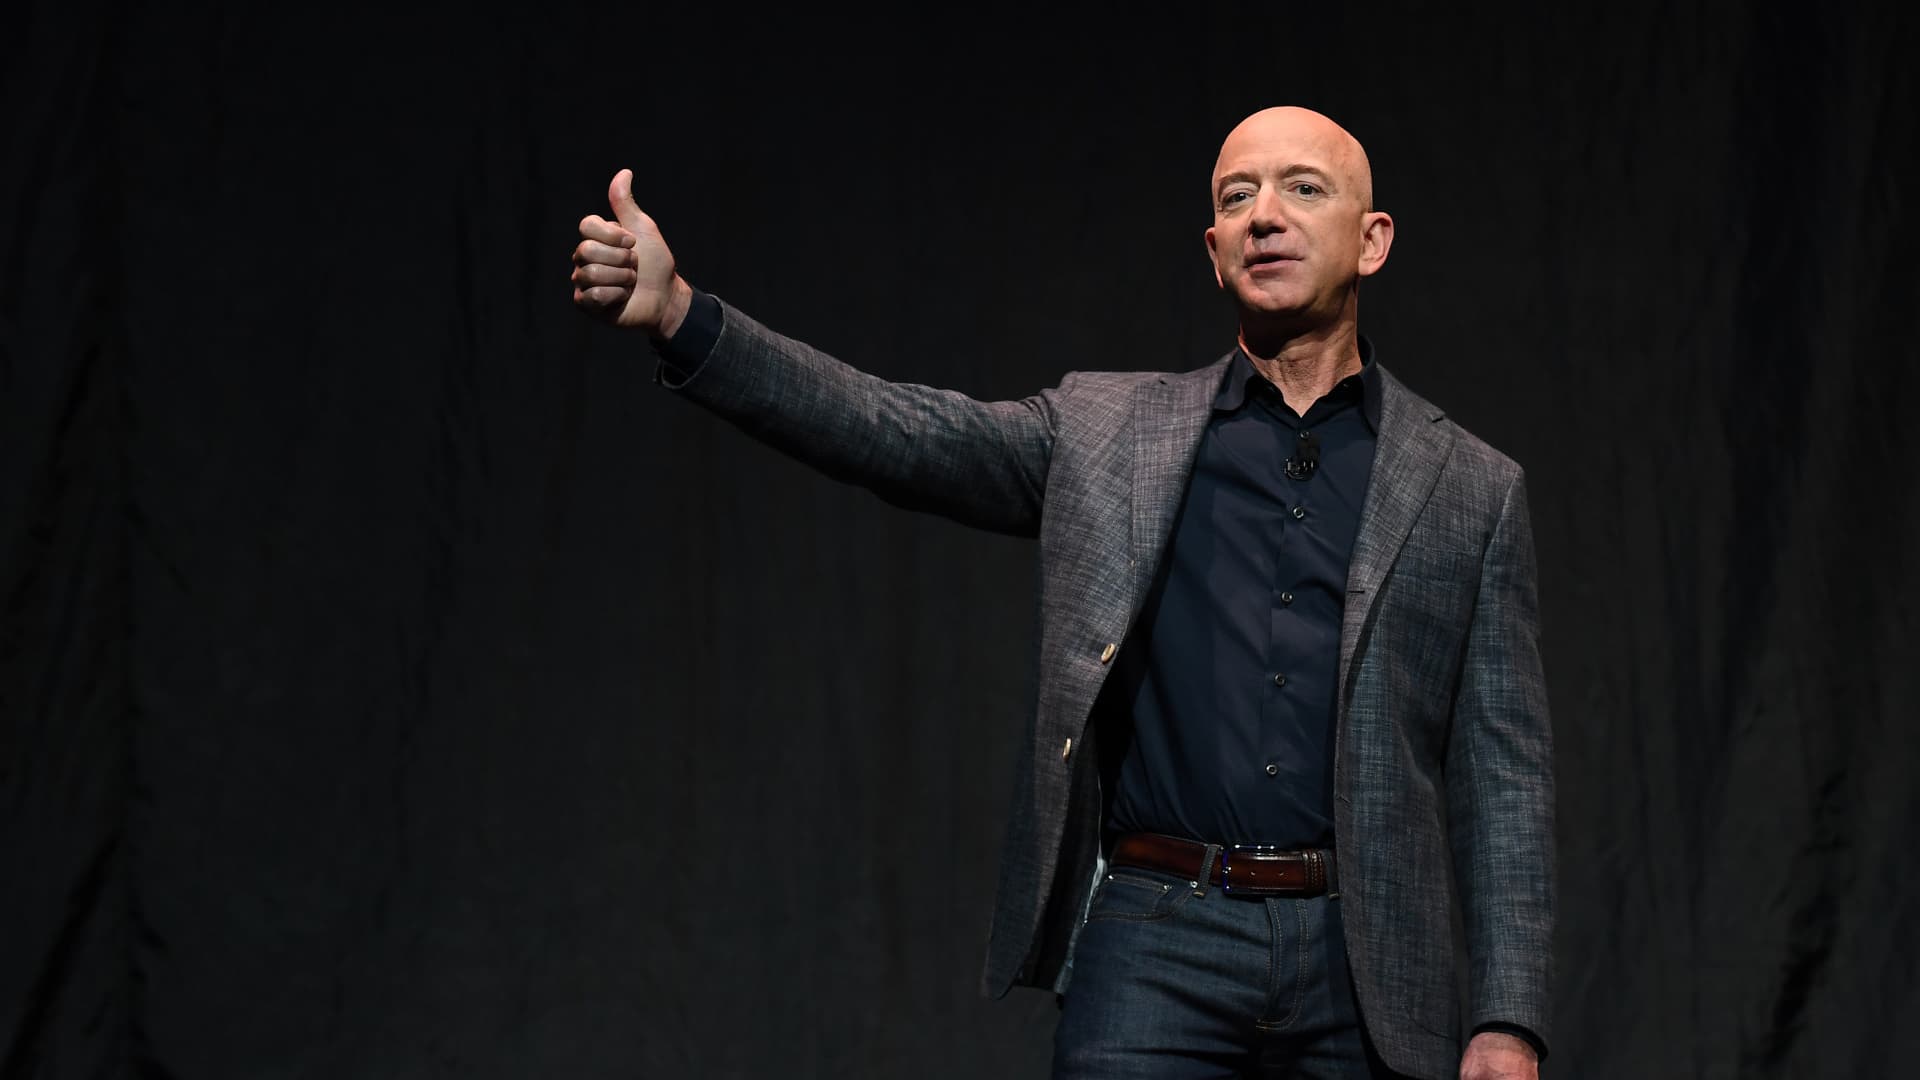 Jeff Bezos gives a thumbs-up as he speaks during an event about Blue Origin's space exploration plans in Washington, D.C., May 9, 2019.